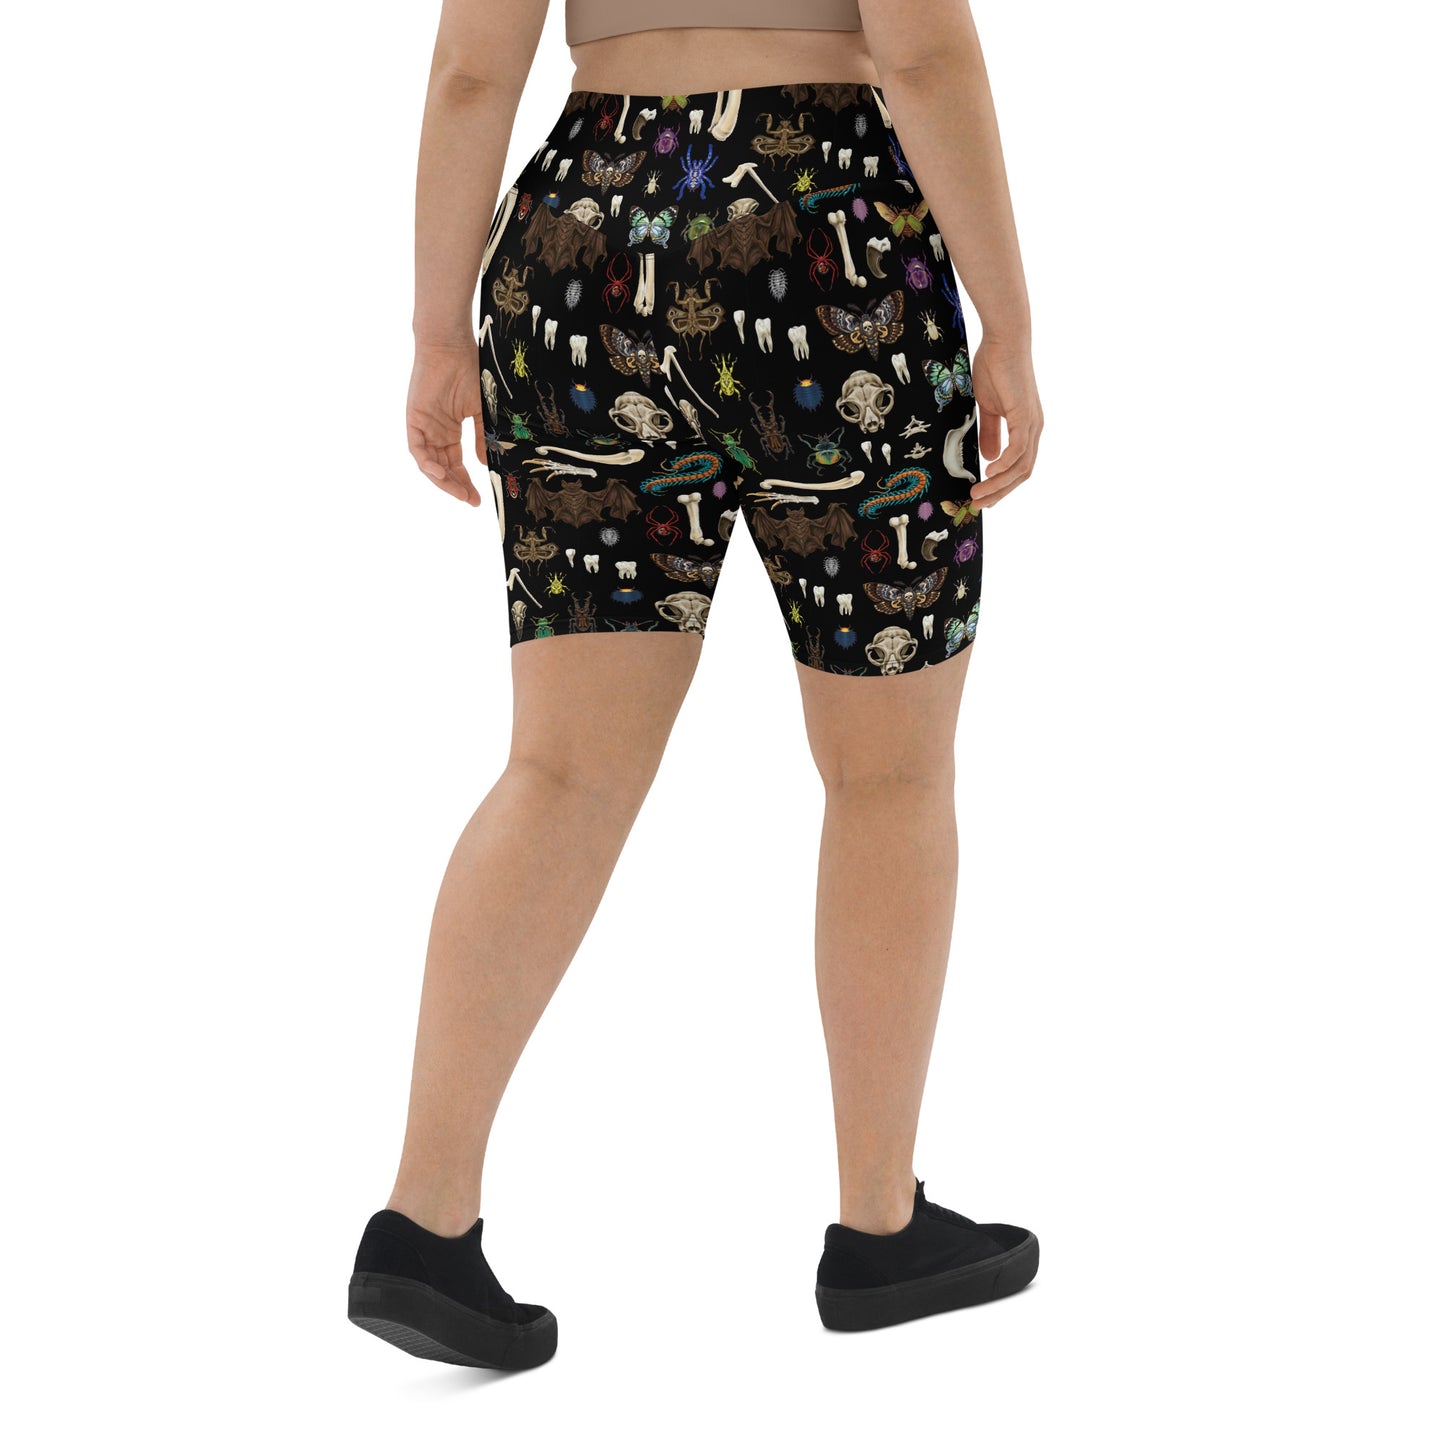 The Collection Biker Shorts